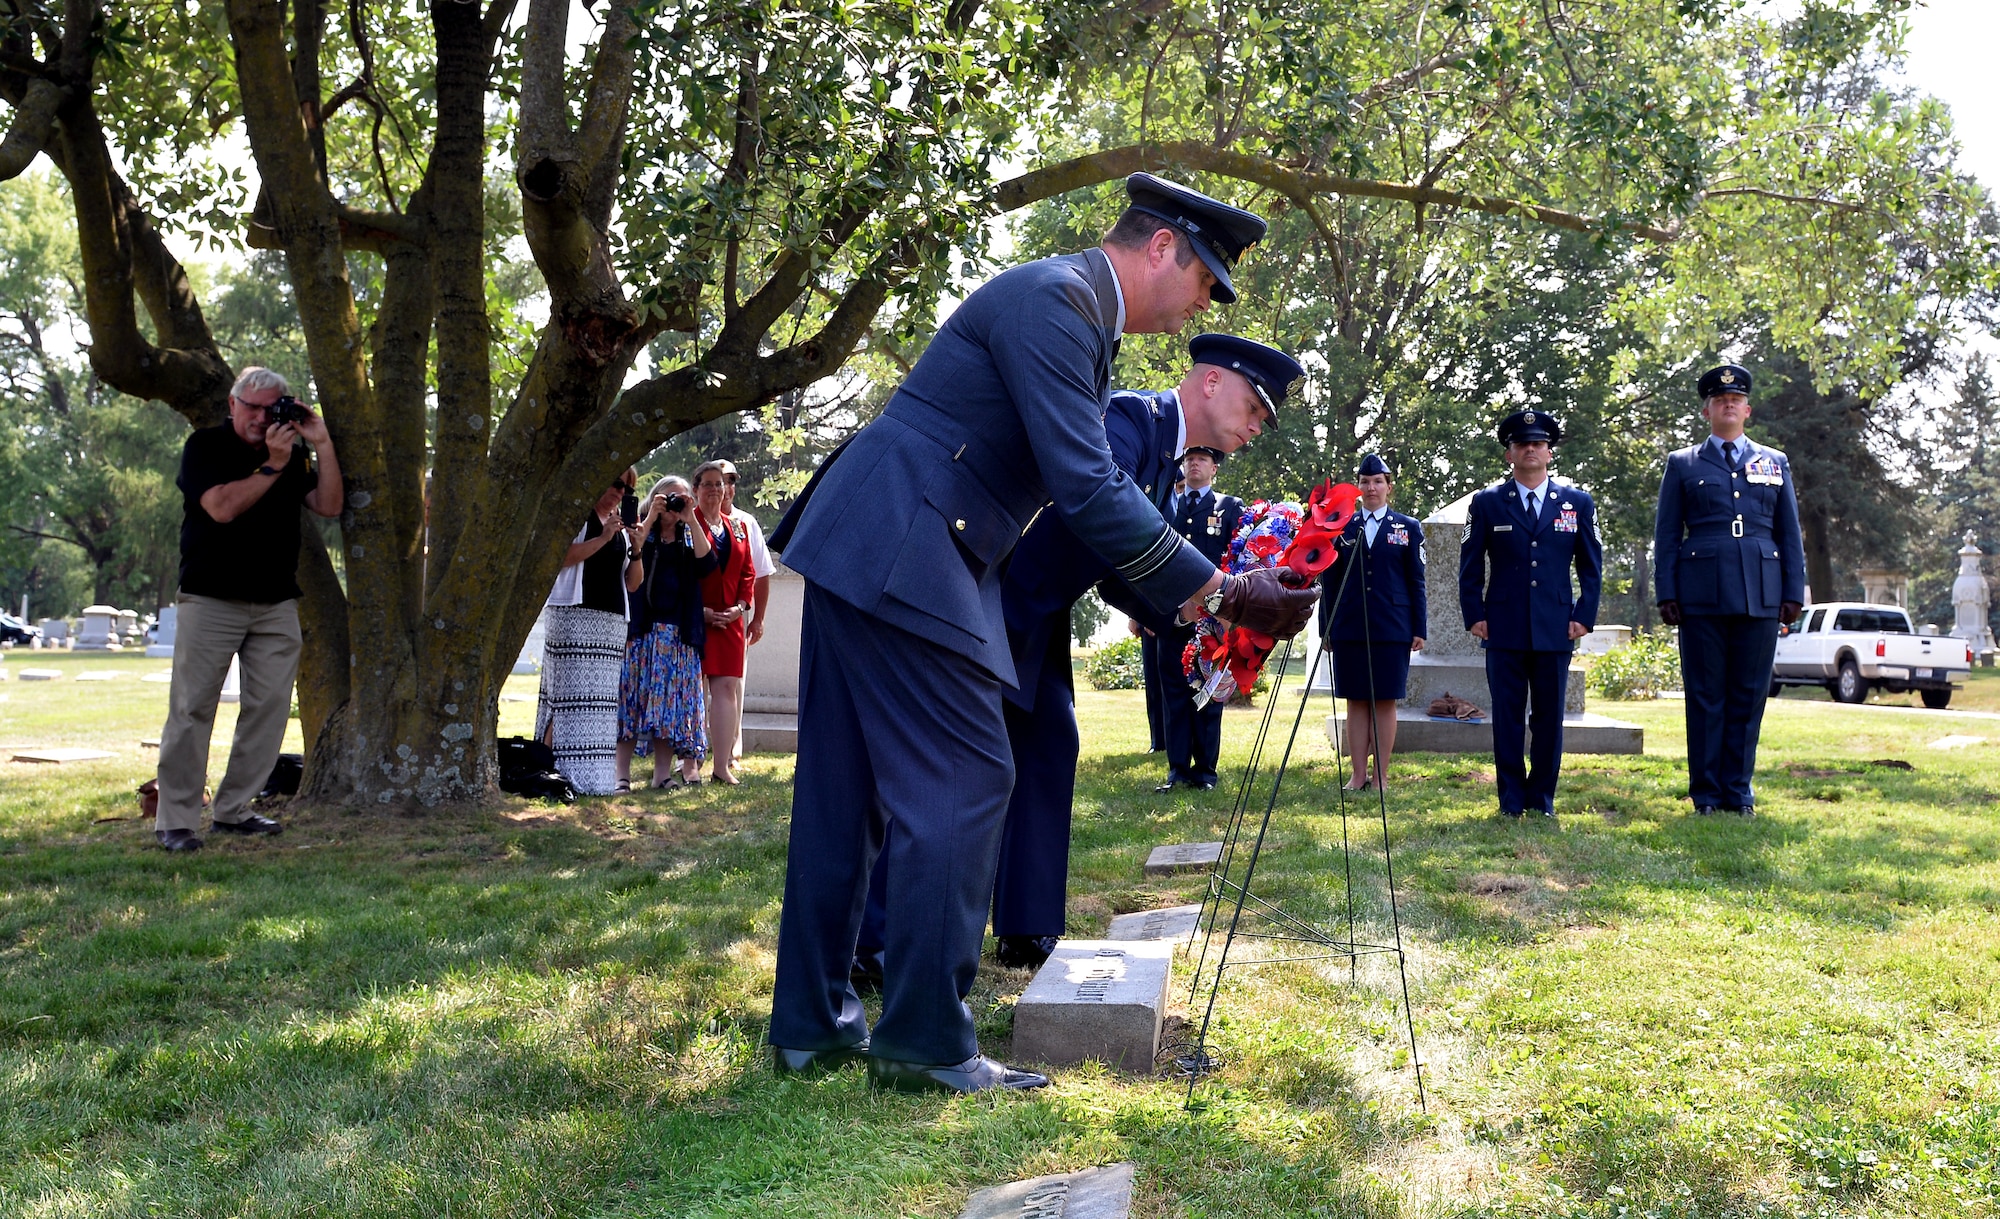 From left to right, 56 Squadron Leader David Hockley and 55th Wing Commander Col. Michael Manion place their respective country’s wreaths on the gravesite of Lt. Jarvis Offutt at Forest Lawn Cemetery in Omaha, Nebraska Aug. 13, 2018. A ceremony was held during the 2018 Offutt Air Force Base air and space show to honor Offutt who the base is named after. Offutt was the first Omaha native to die in WWI when his plane was shot down over France 100 years ago while serving in the 56 Squadron. (U.S. Air Force photo by Josh Plueger)